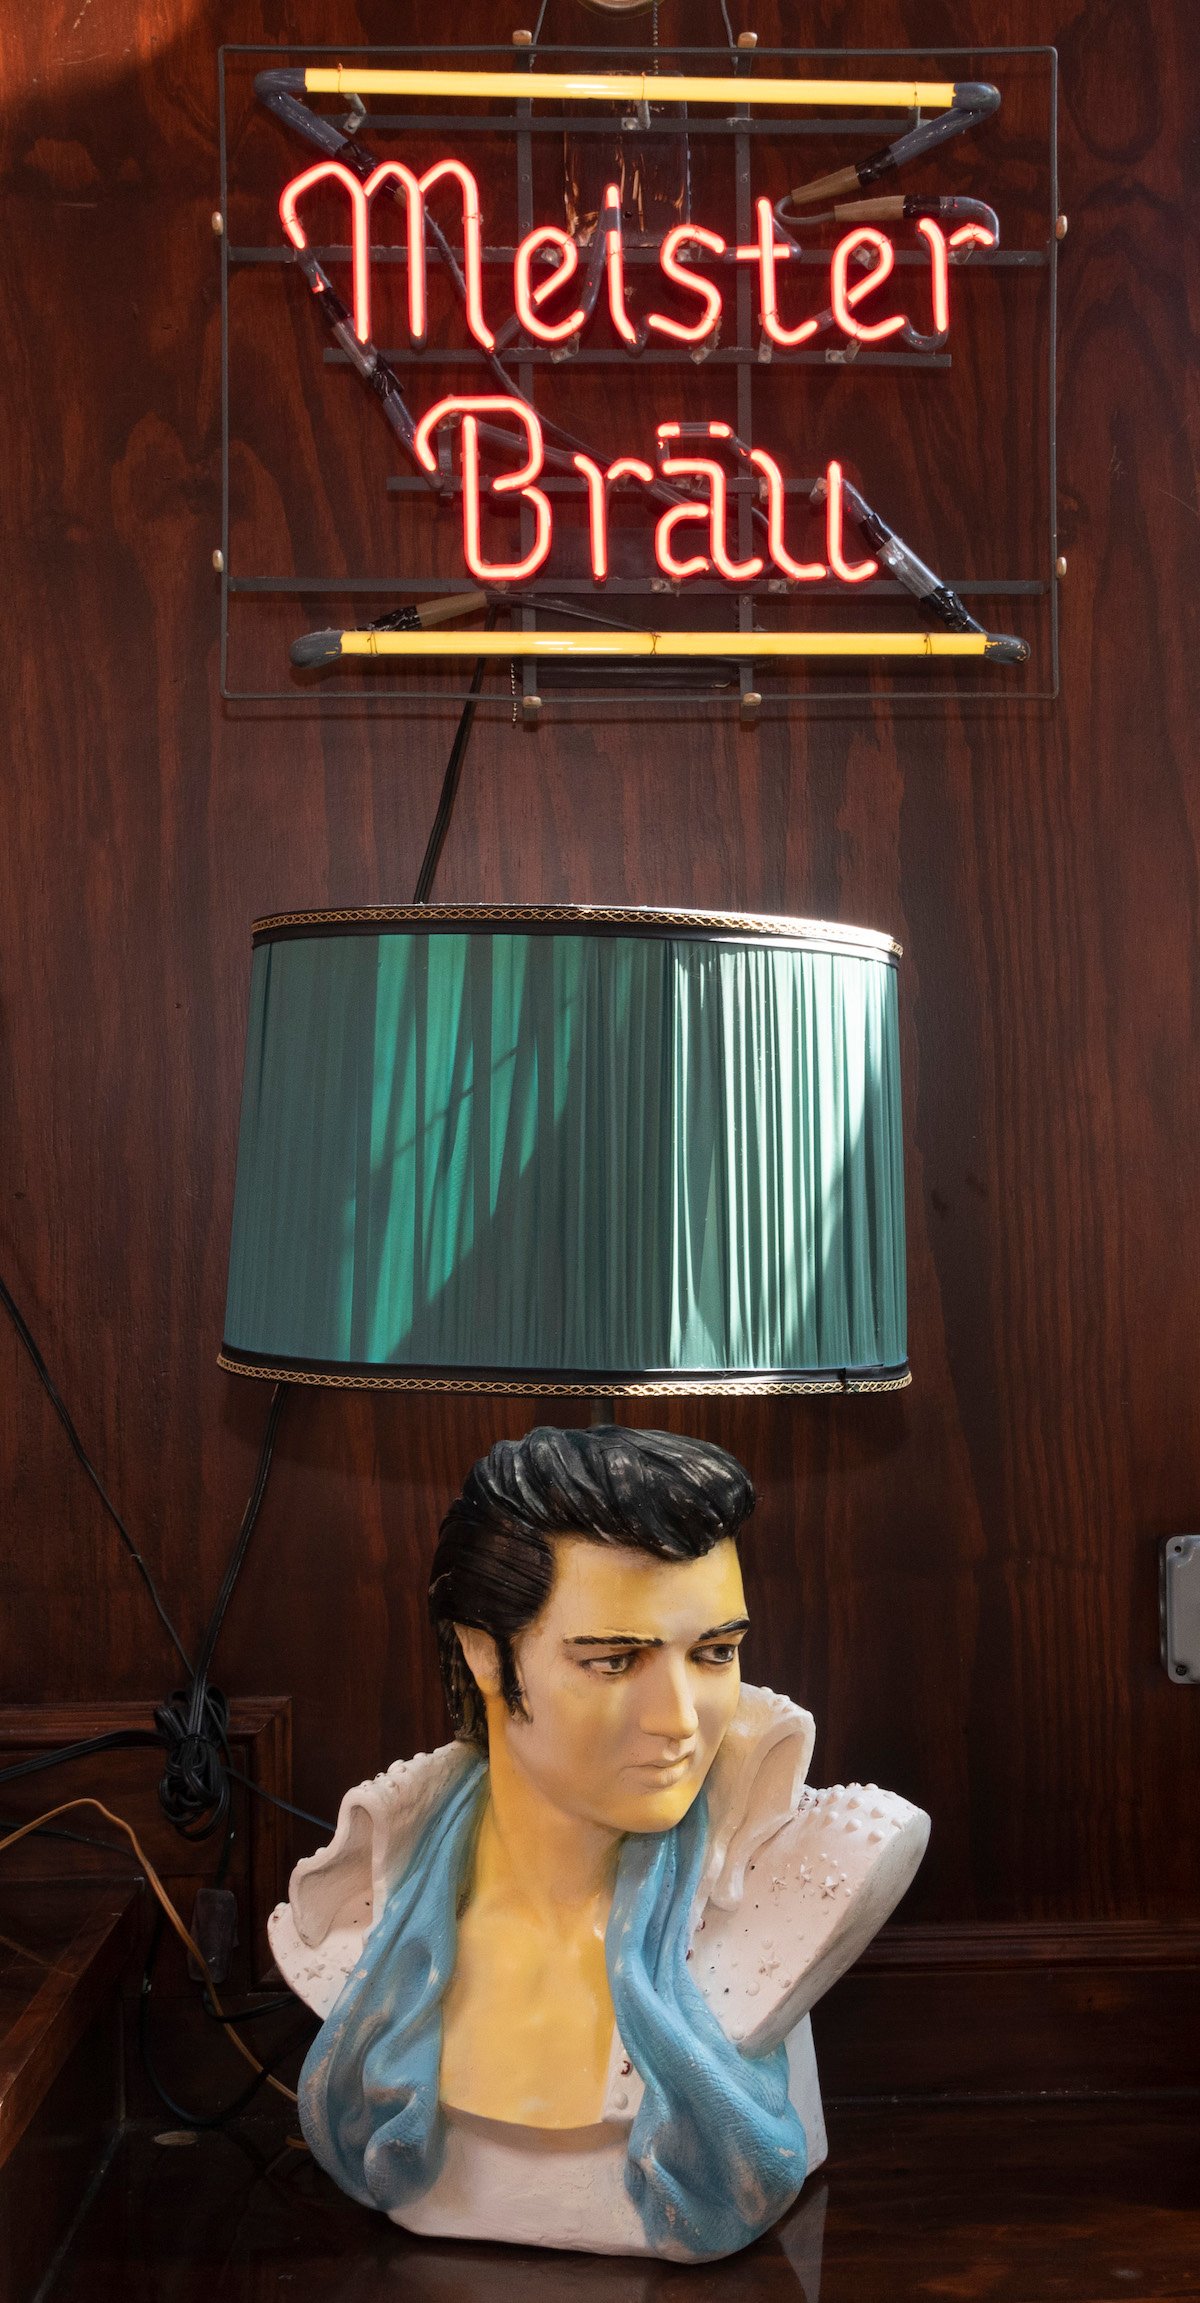 Whitlow's Americana decor has bar-hopped over the decades, like the Elvis lamp. Photograph courtesy of Whitlow's